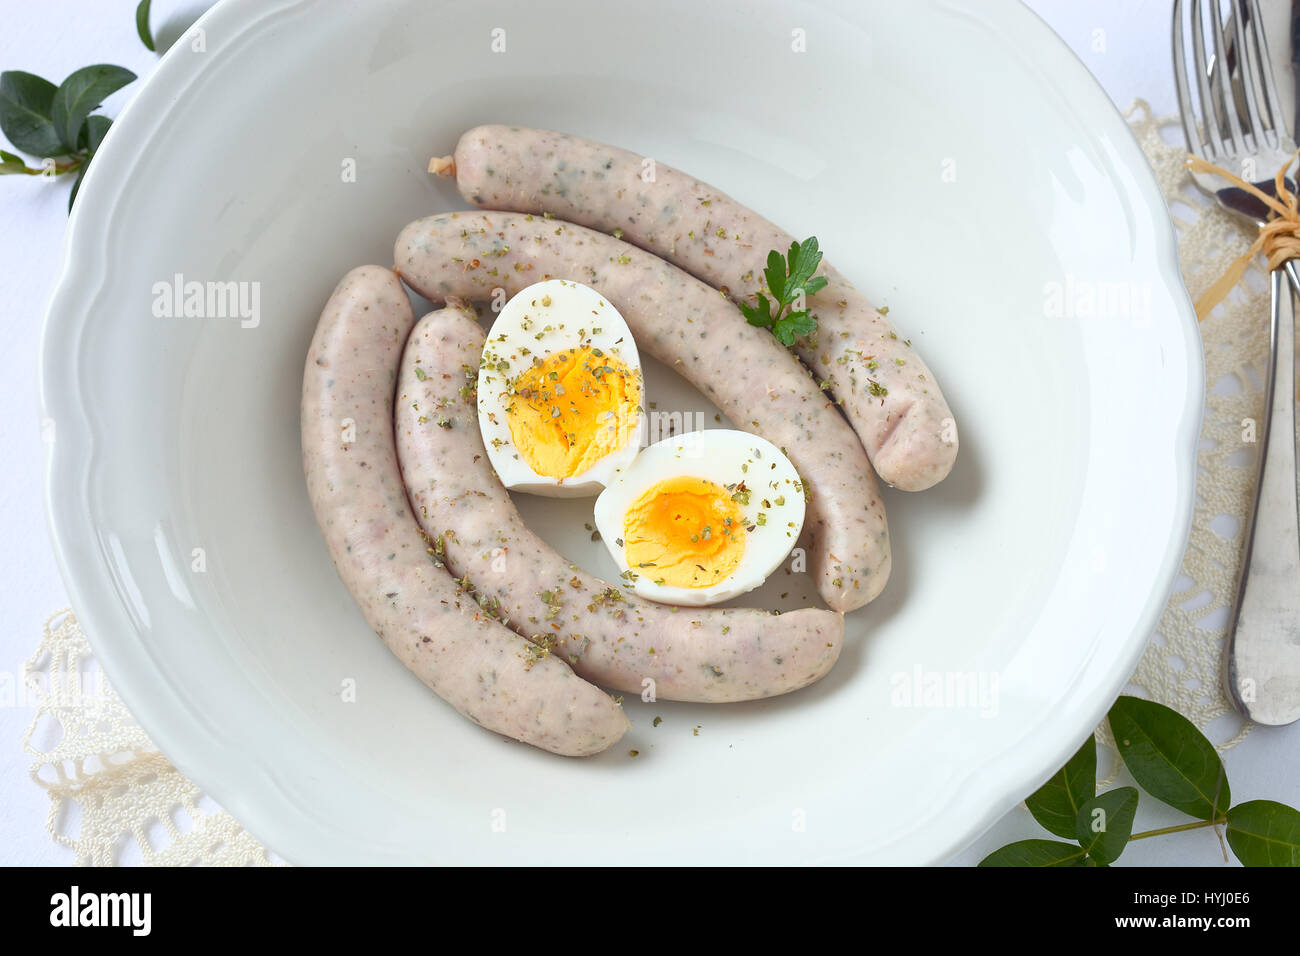 White sausage and egg in a soup bowl. Stock Photo